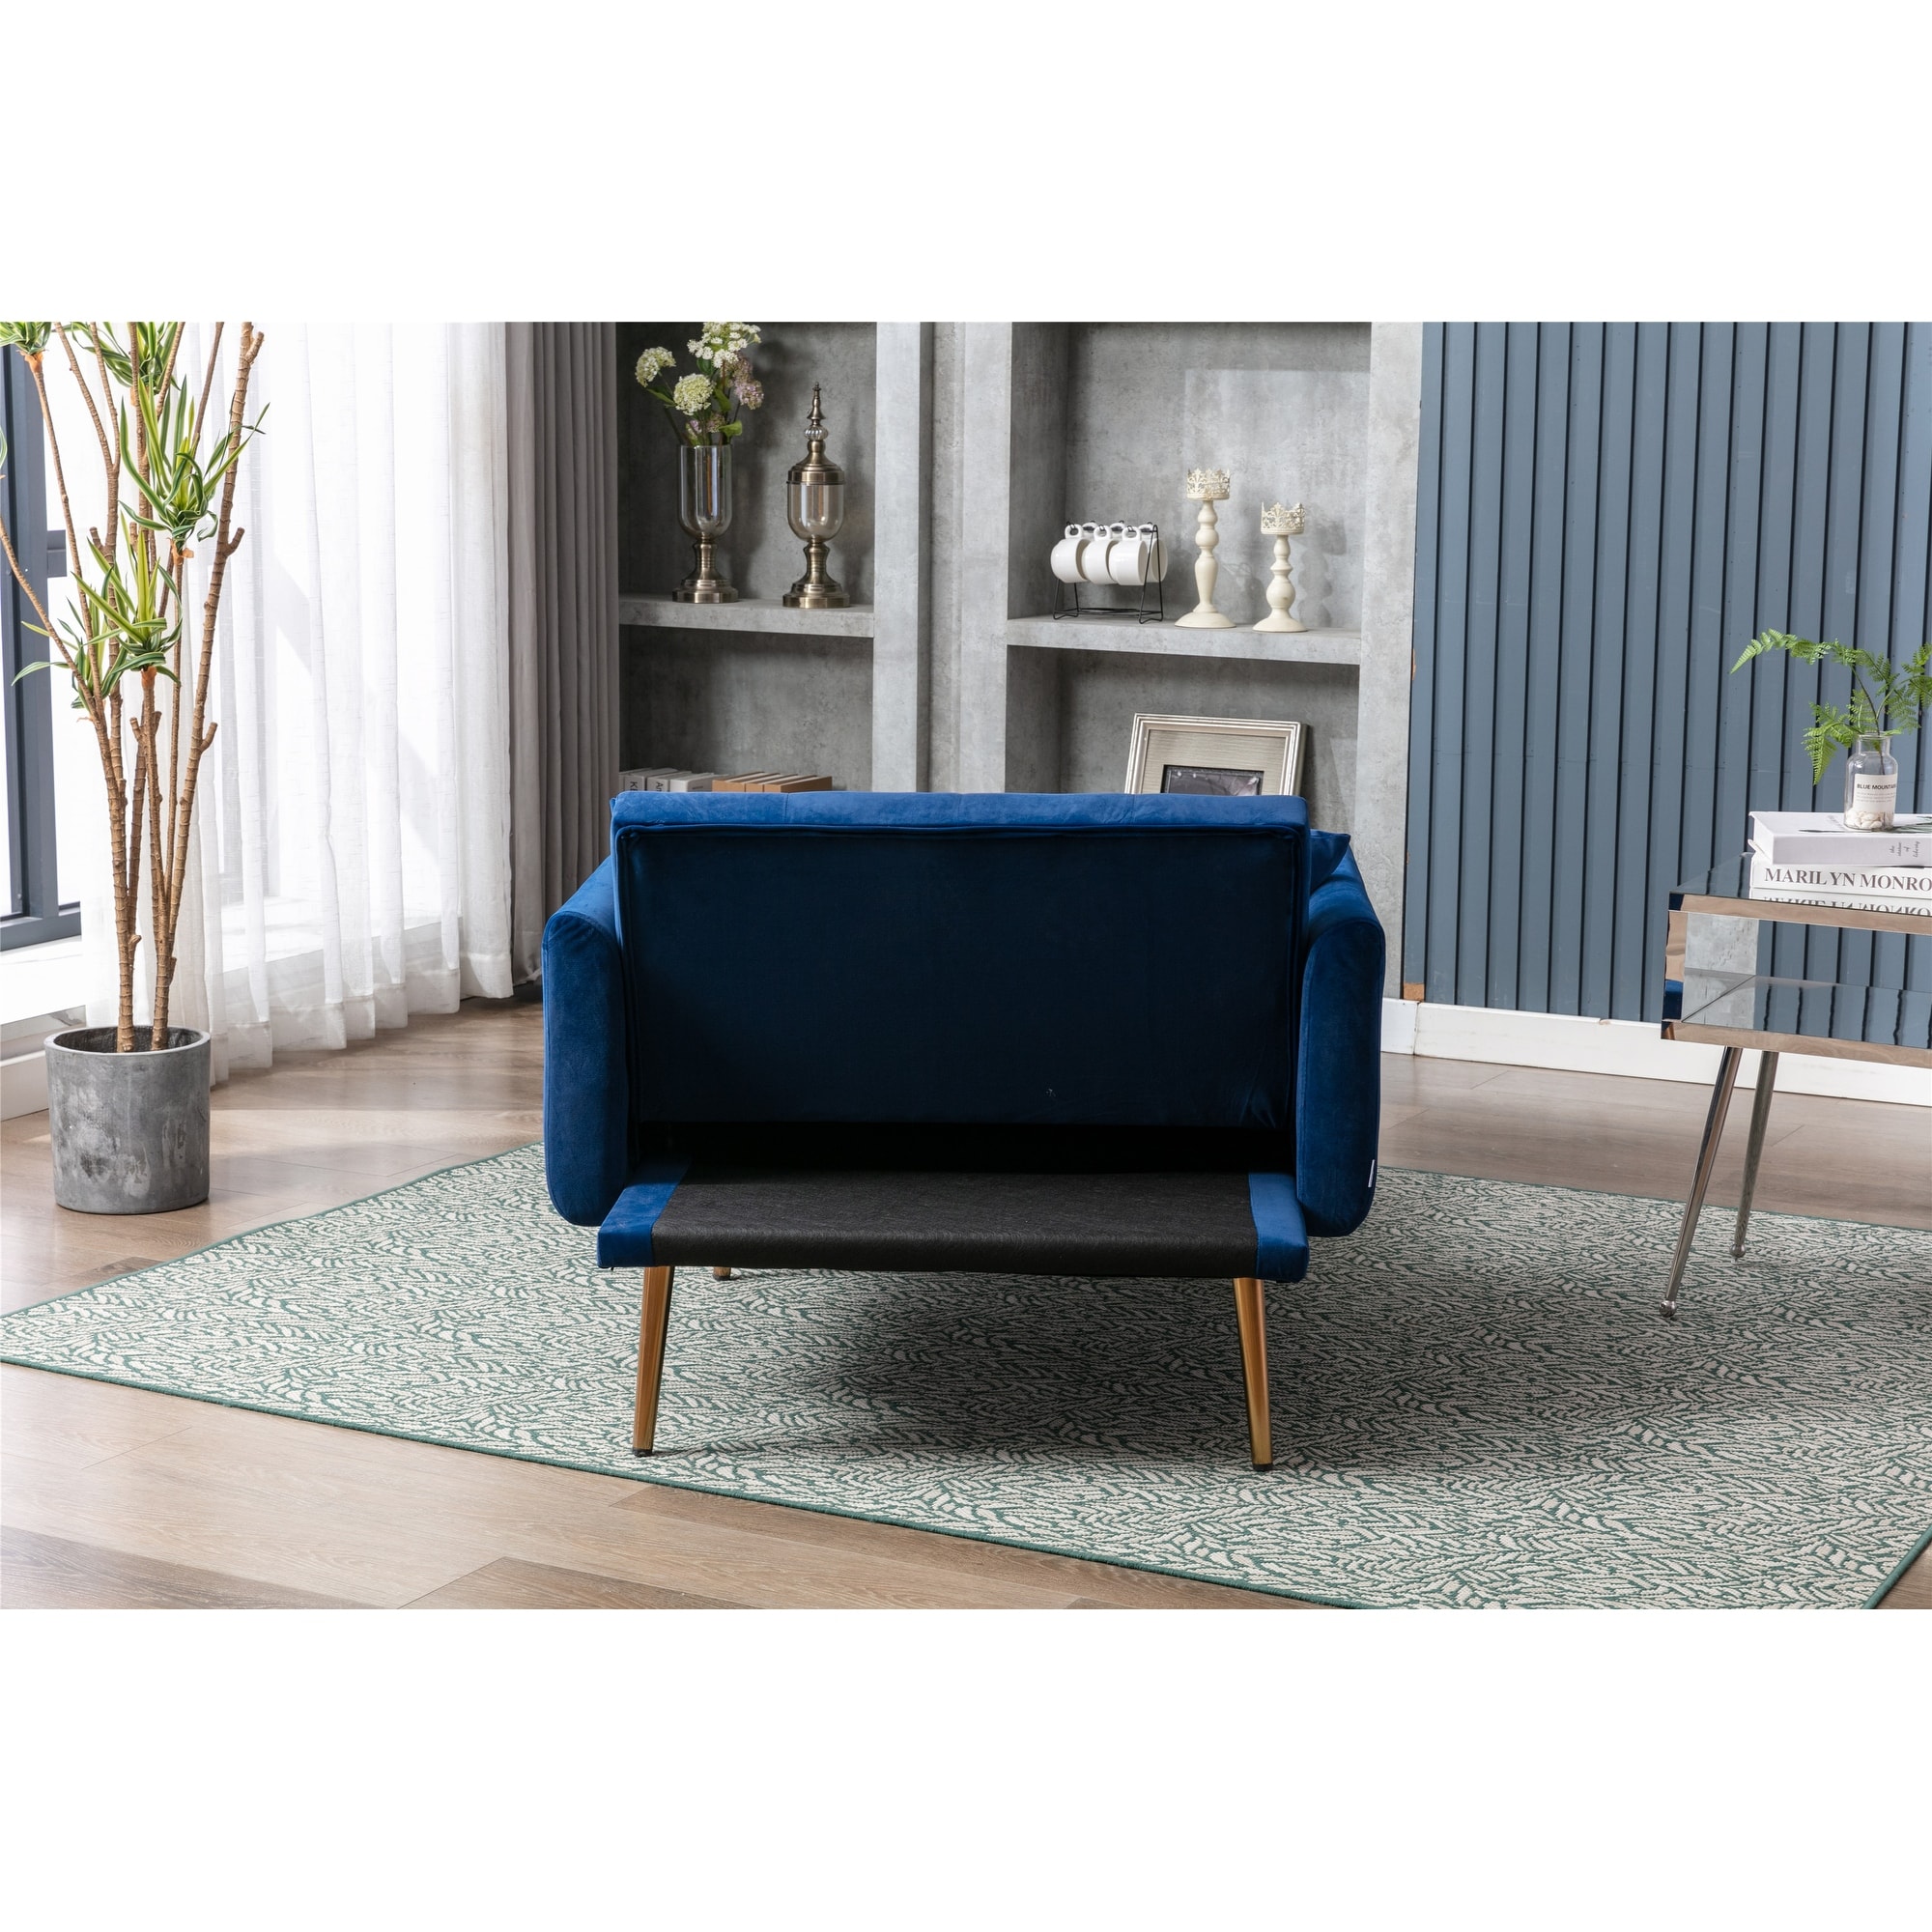 Velvet Tufted Chaise Lounge with Chair & Ottoman Sets for Livingroom, Navy